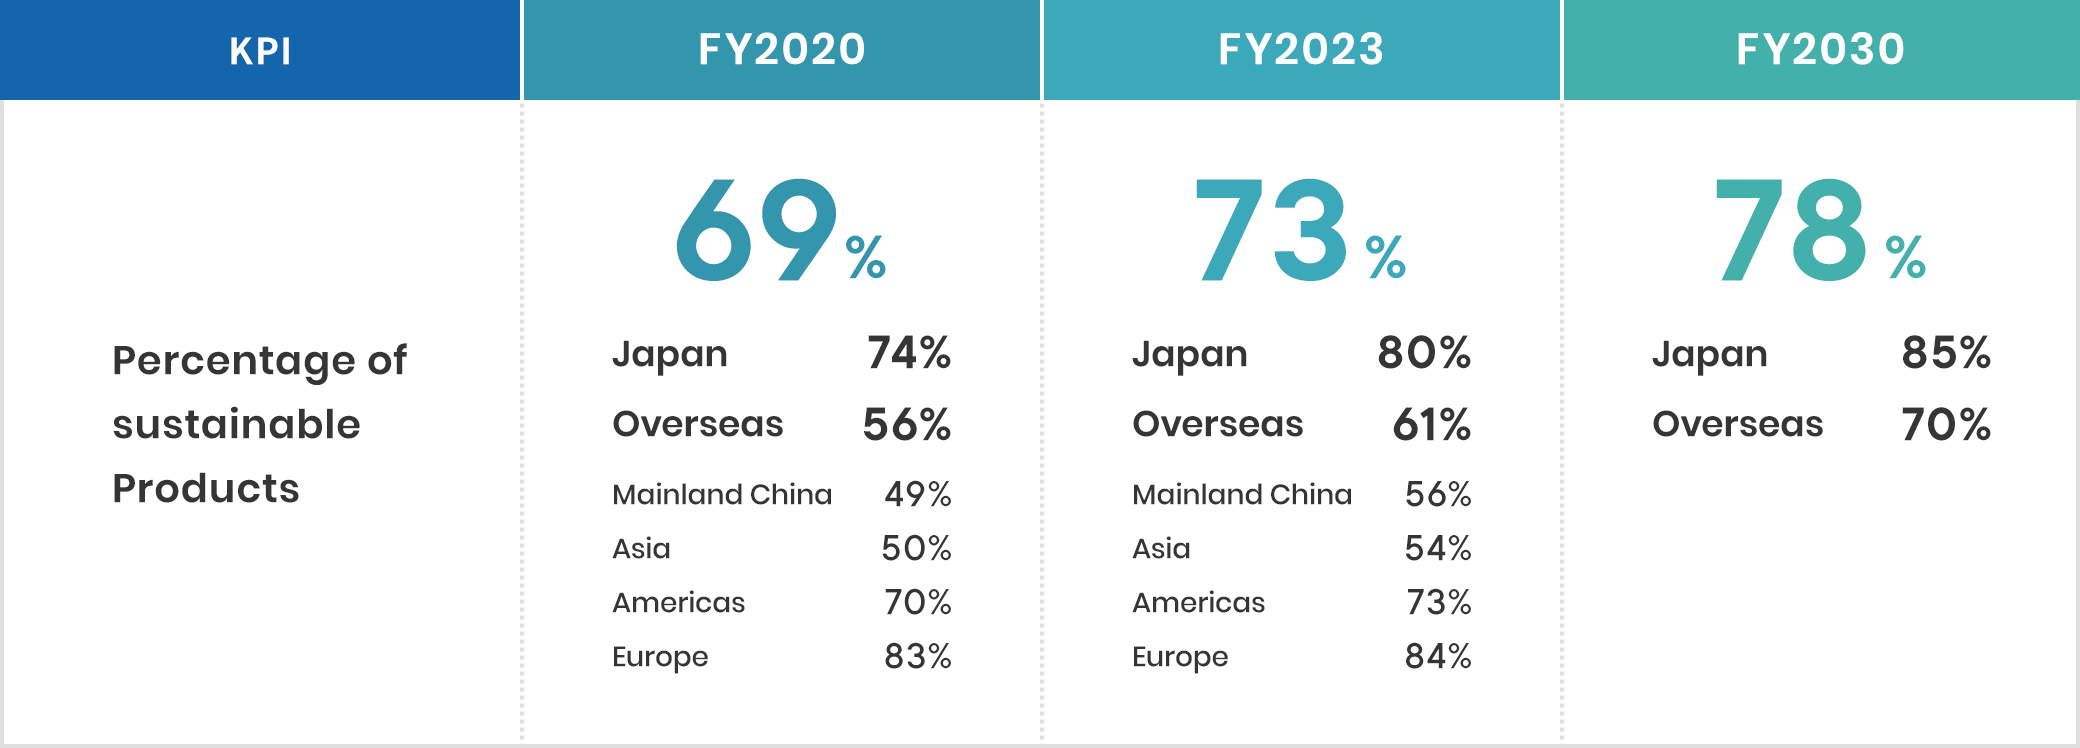 KPI: Percentage of sustainable products. FY2020: 69%, Japan 74%, Overseas 56%, Mainland China 49%, Asia 50%, Americas 70%, Europe 83%. FY2023: 73%, Japan 80%, Overseas 61%, Mainland China 56%, Asia 54%, Americas 73%, Europe 84%. FY2030: 78%, Japan 85%, Overseas 70%.